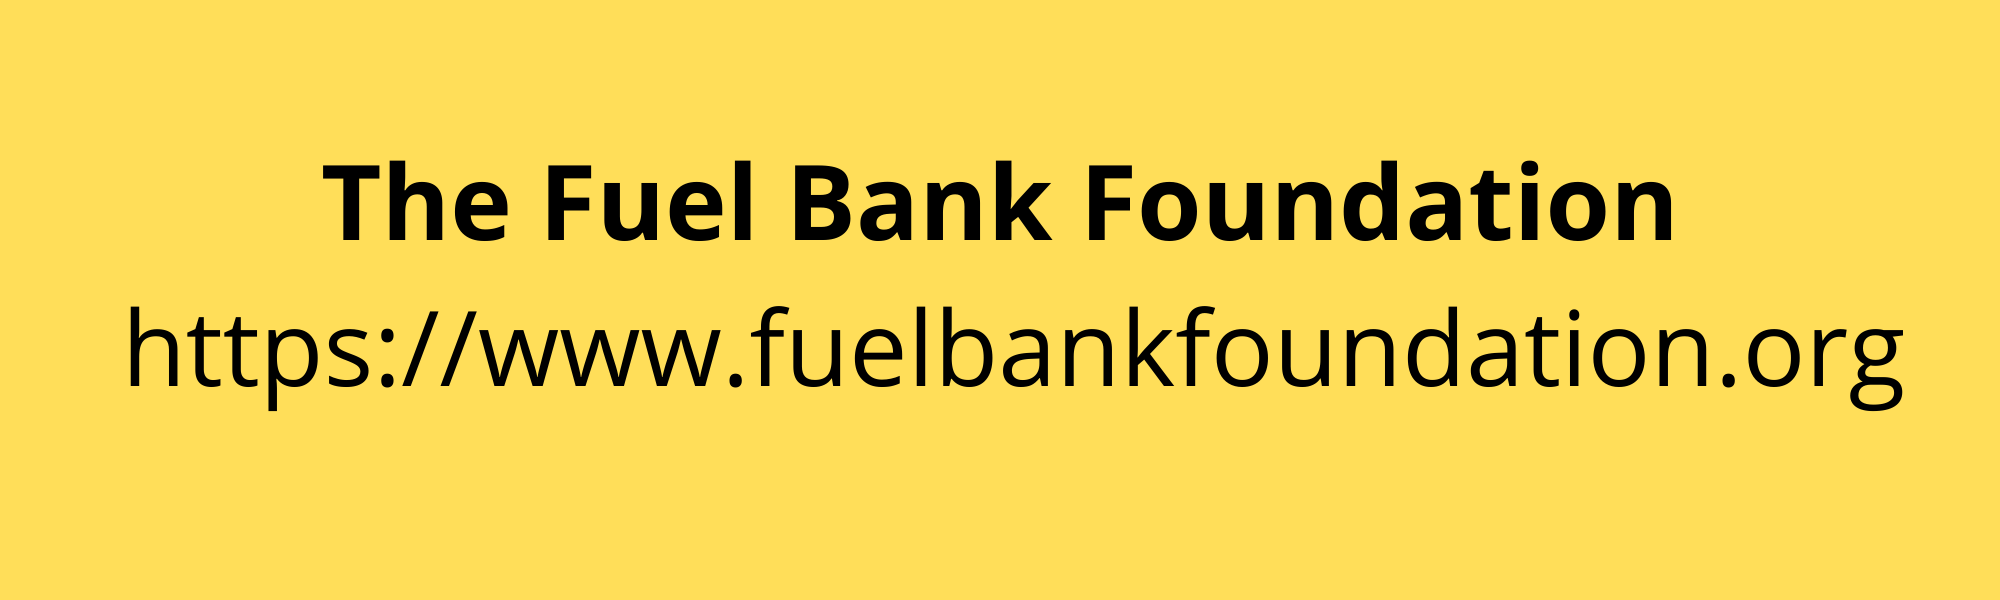 The fuel bank foundation